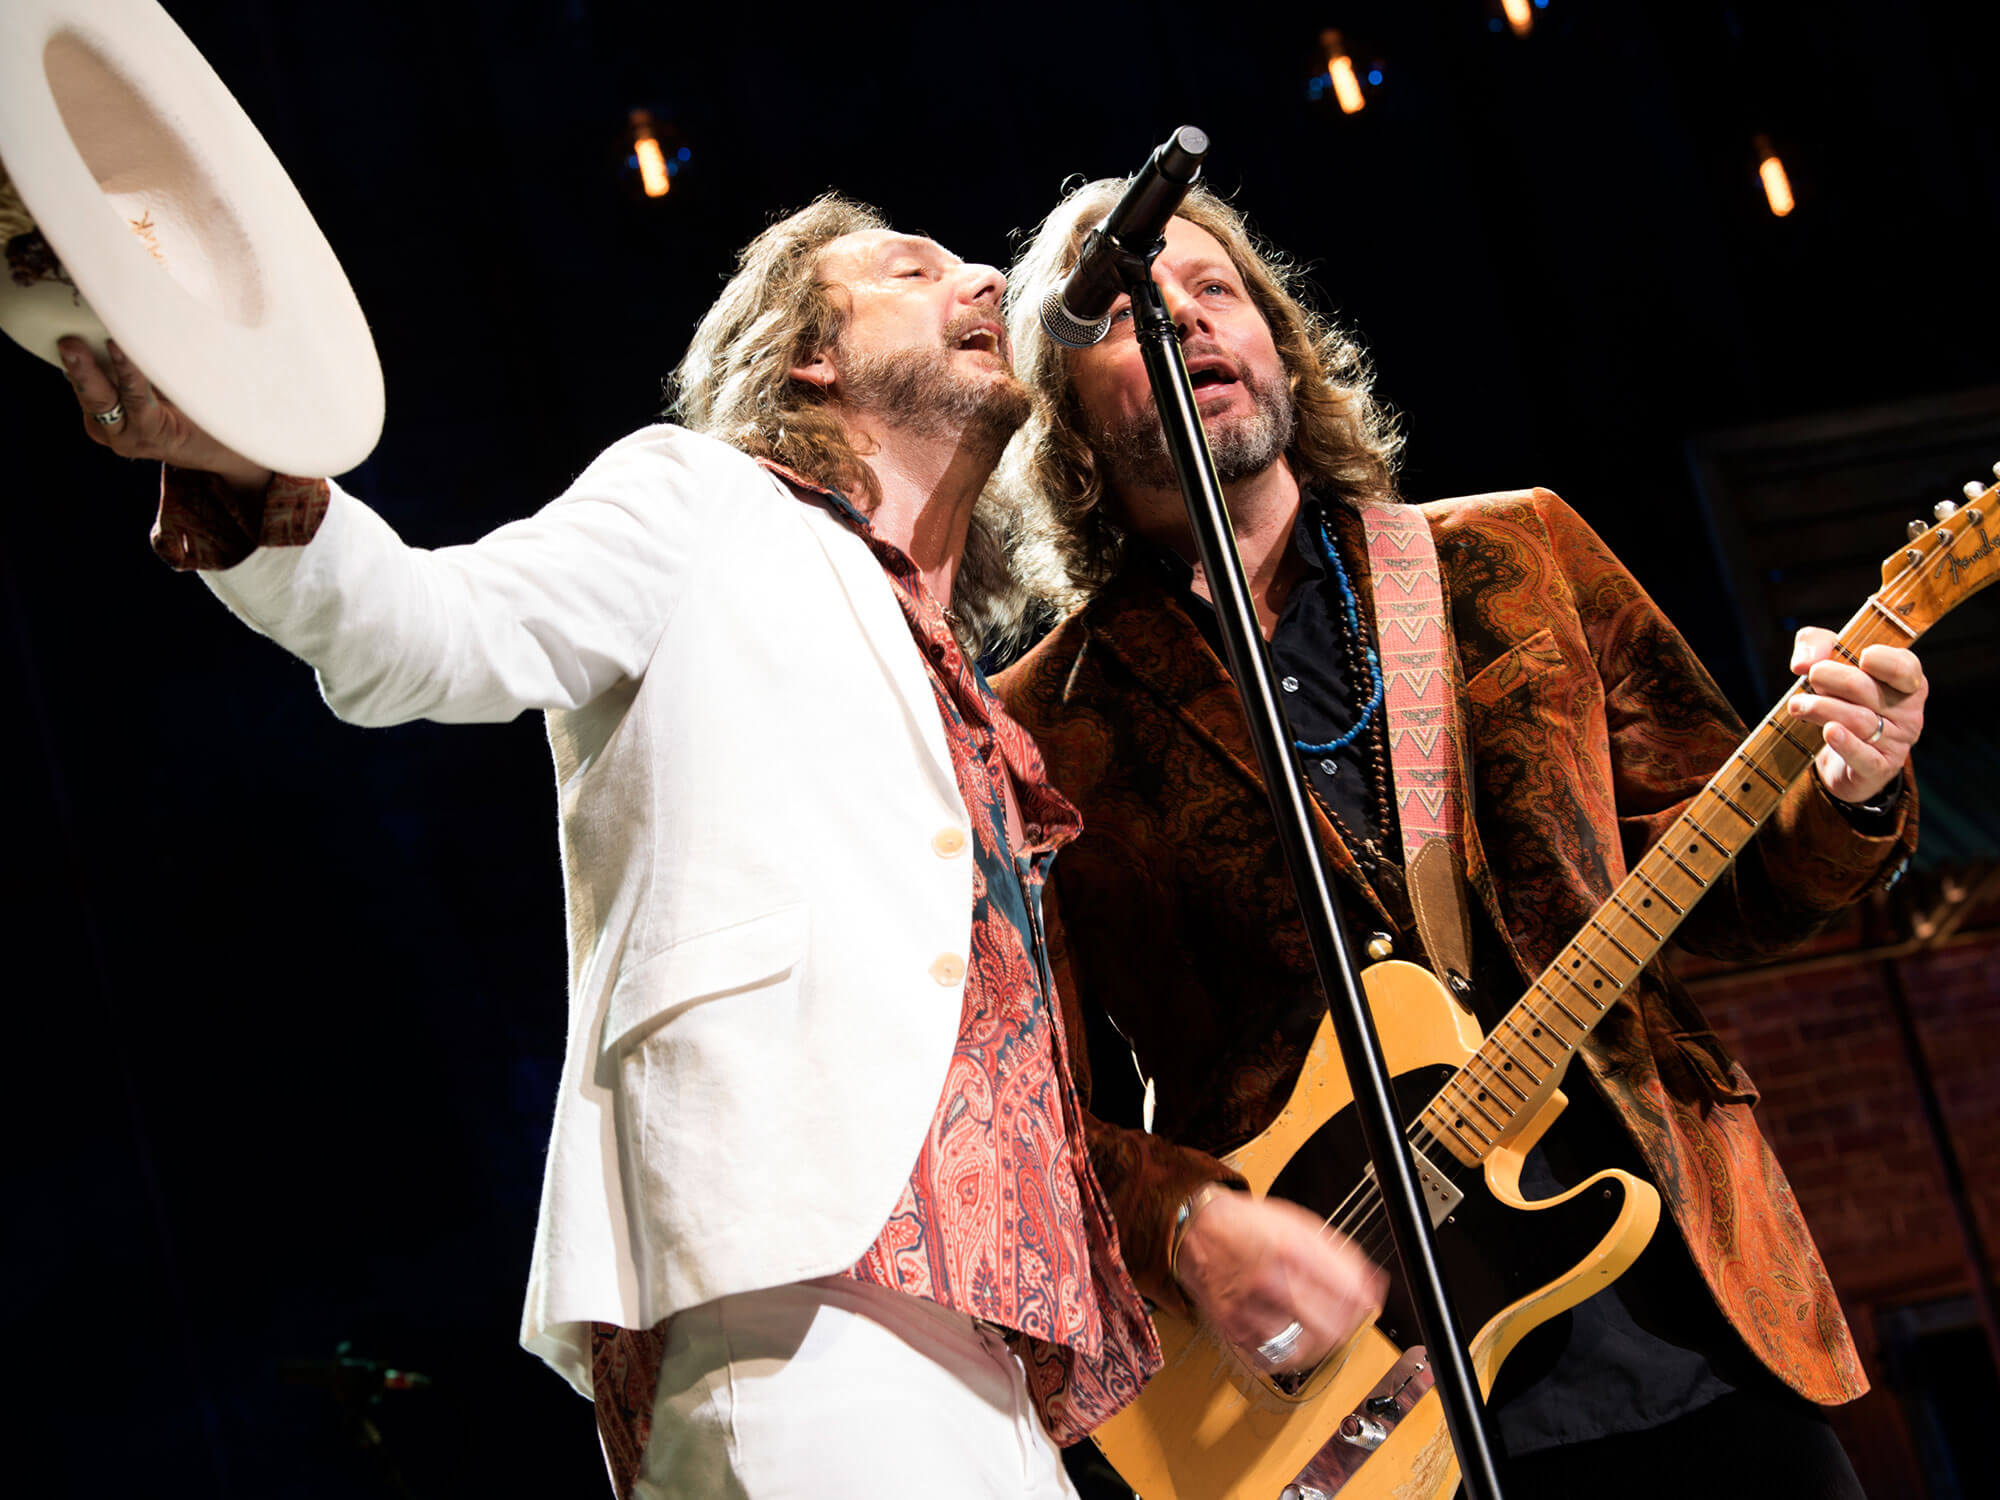 [L-R] Chris Robinson and Rich Robinson of The Black Crowes